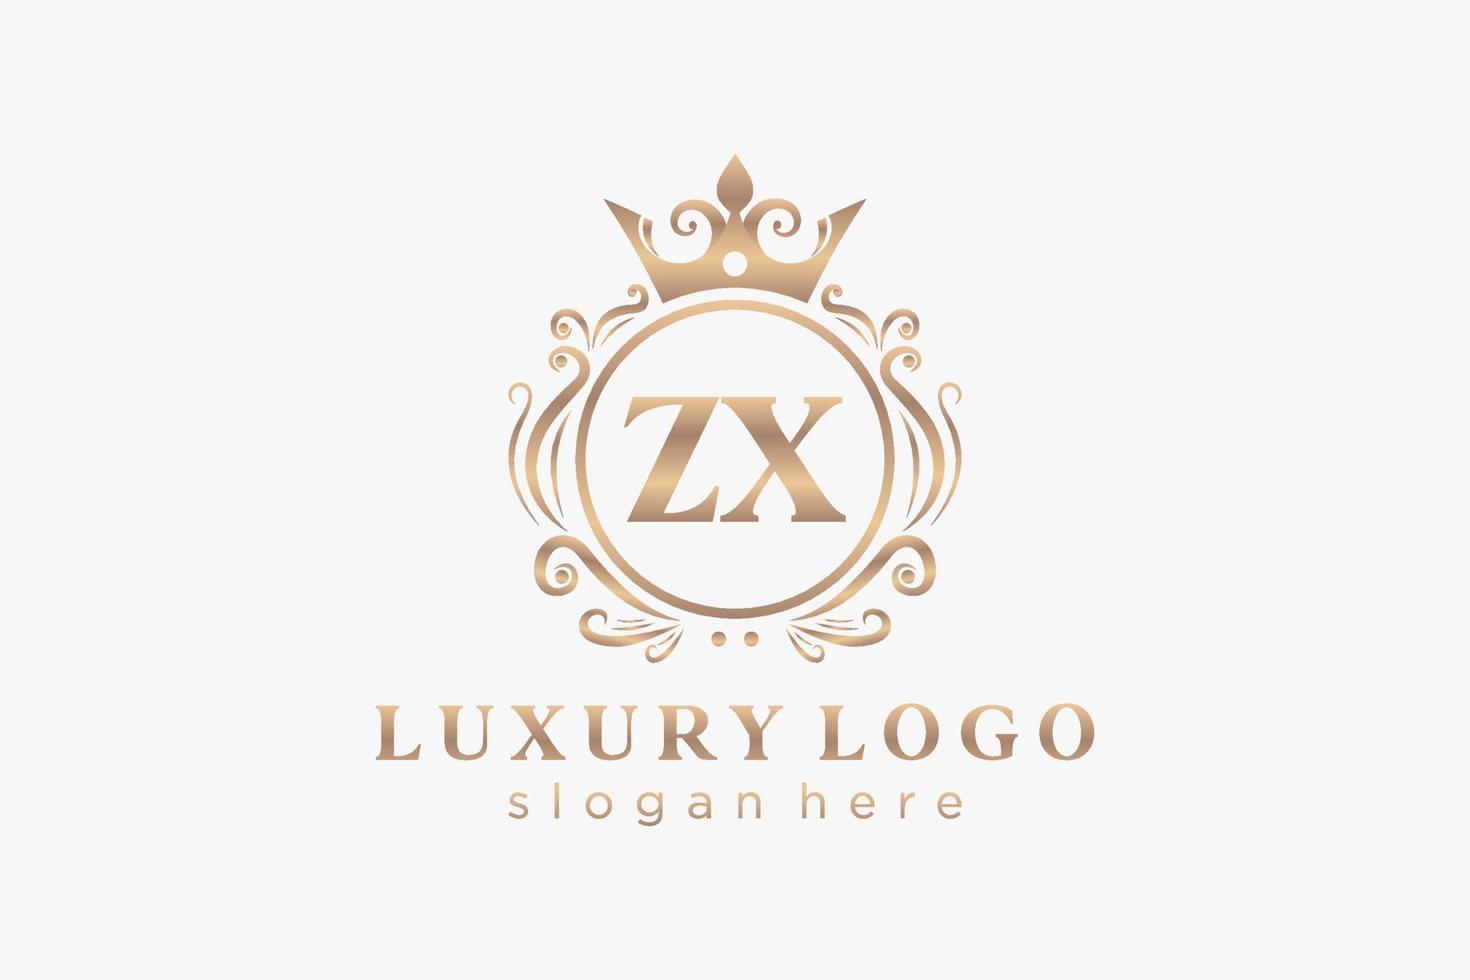 Initial ZX Letter Royal Luxury Logo template in vector art for Restaurant, Royalty, Boutique, Cafe, Hotel, Heraldic, Jewelry, Fashion and other vector illustration.